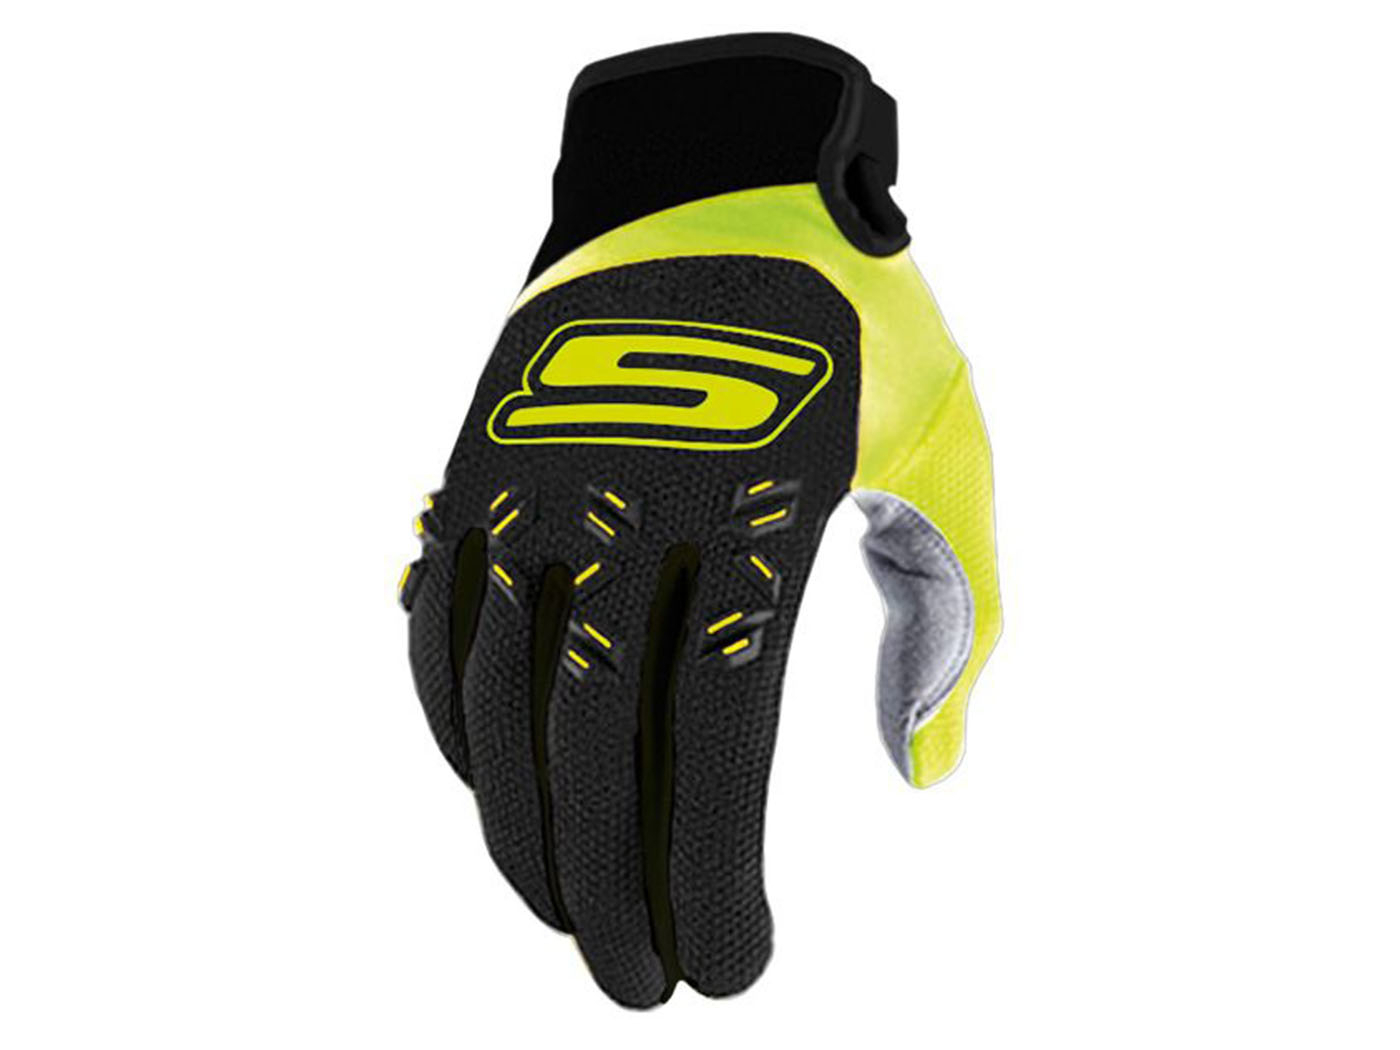 MX Gloves S-Line Homologated, Black / Fluo Yellow - Size S